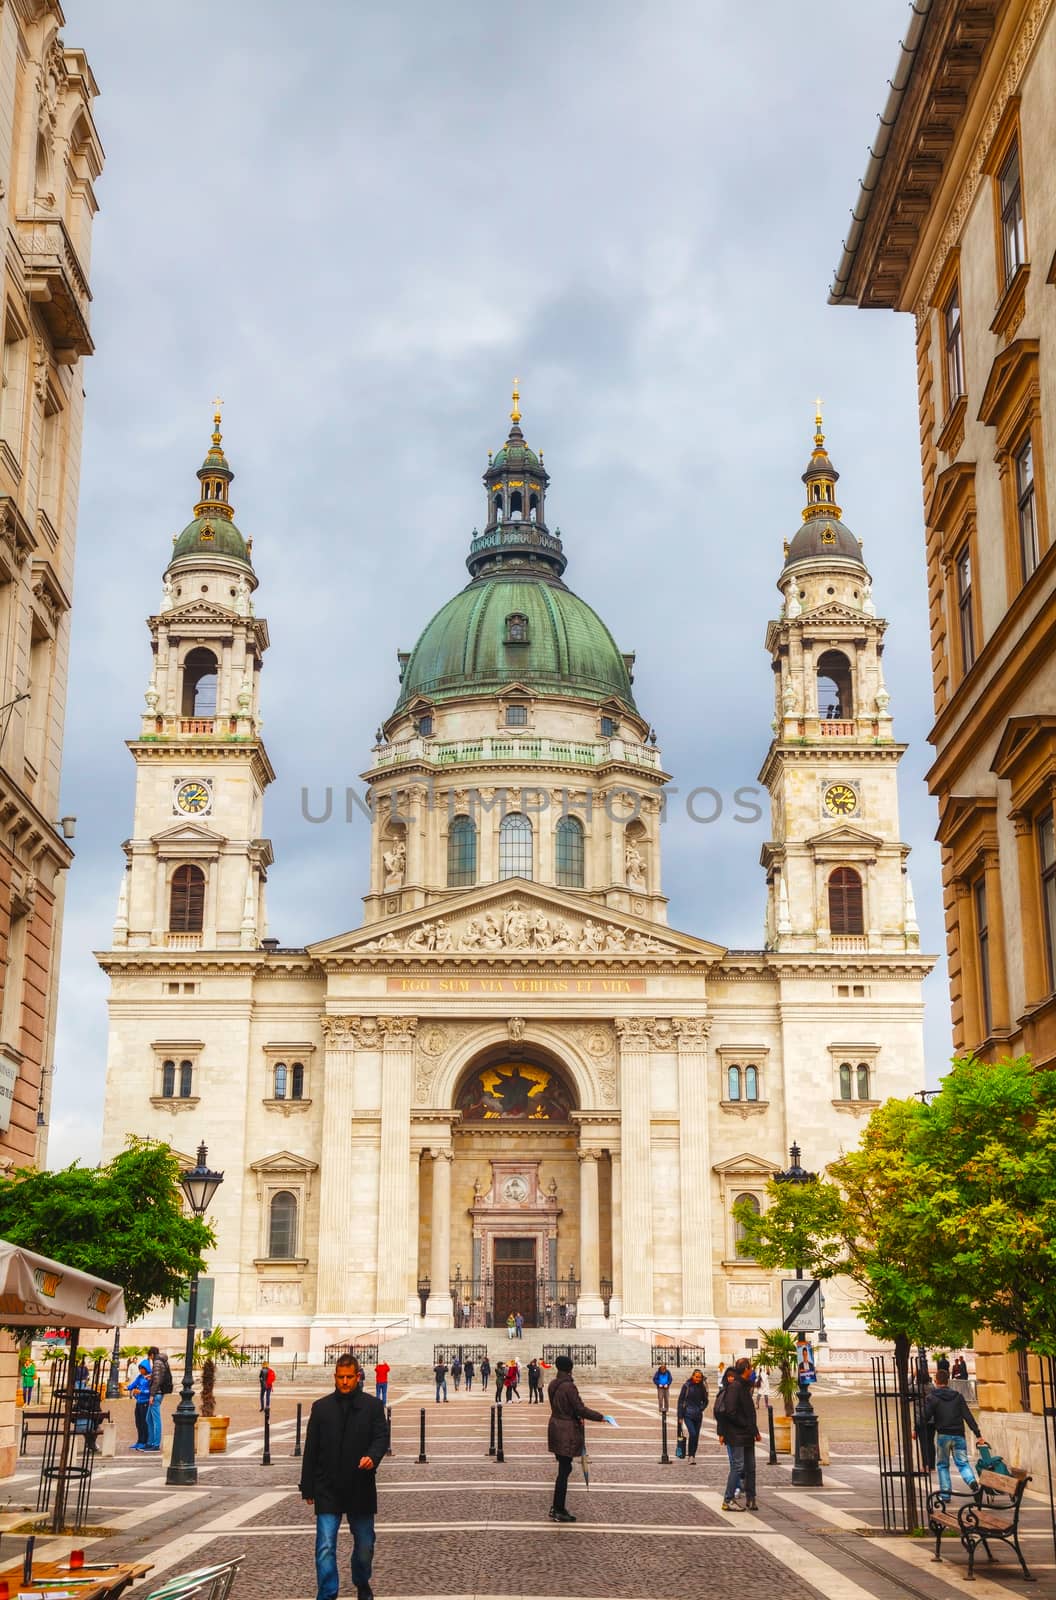 St. Stephen (St. Istvan) Basilica in Budapest, Hungary by AndreyKr